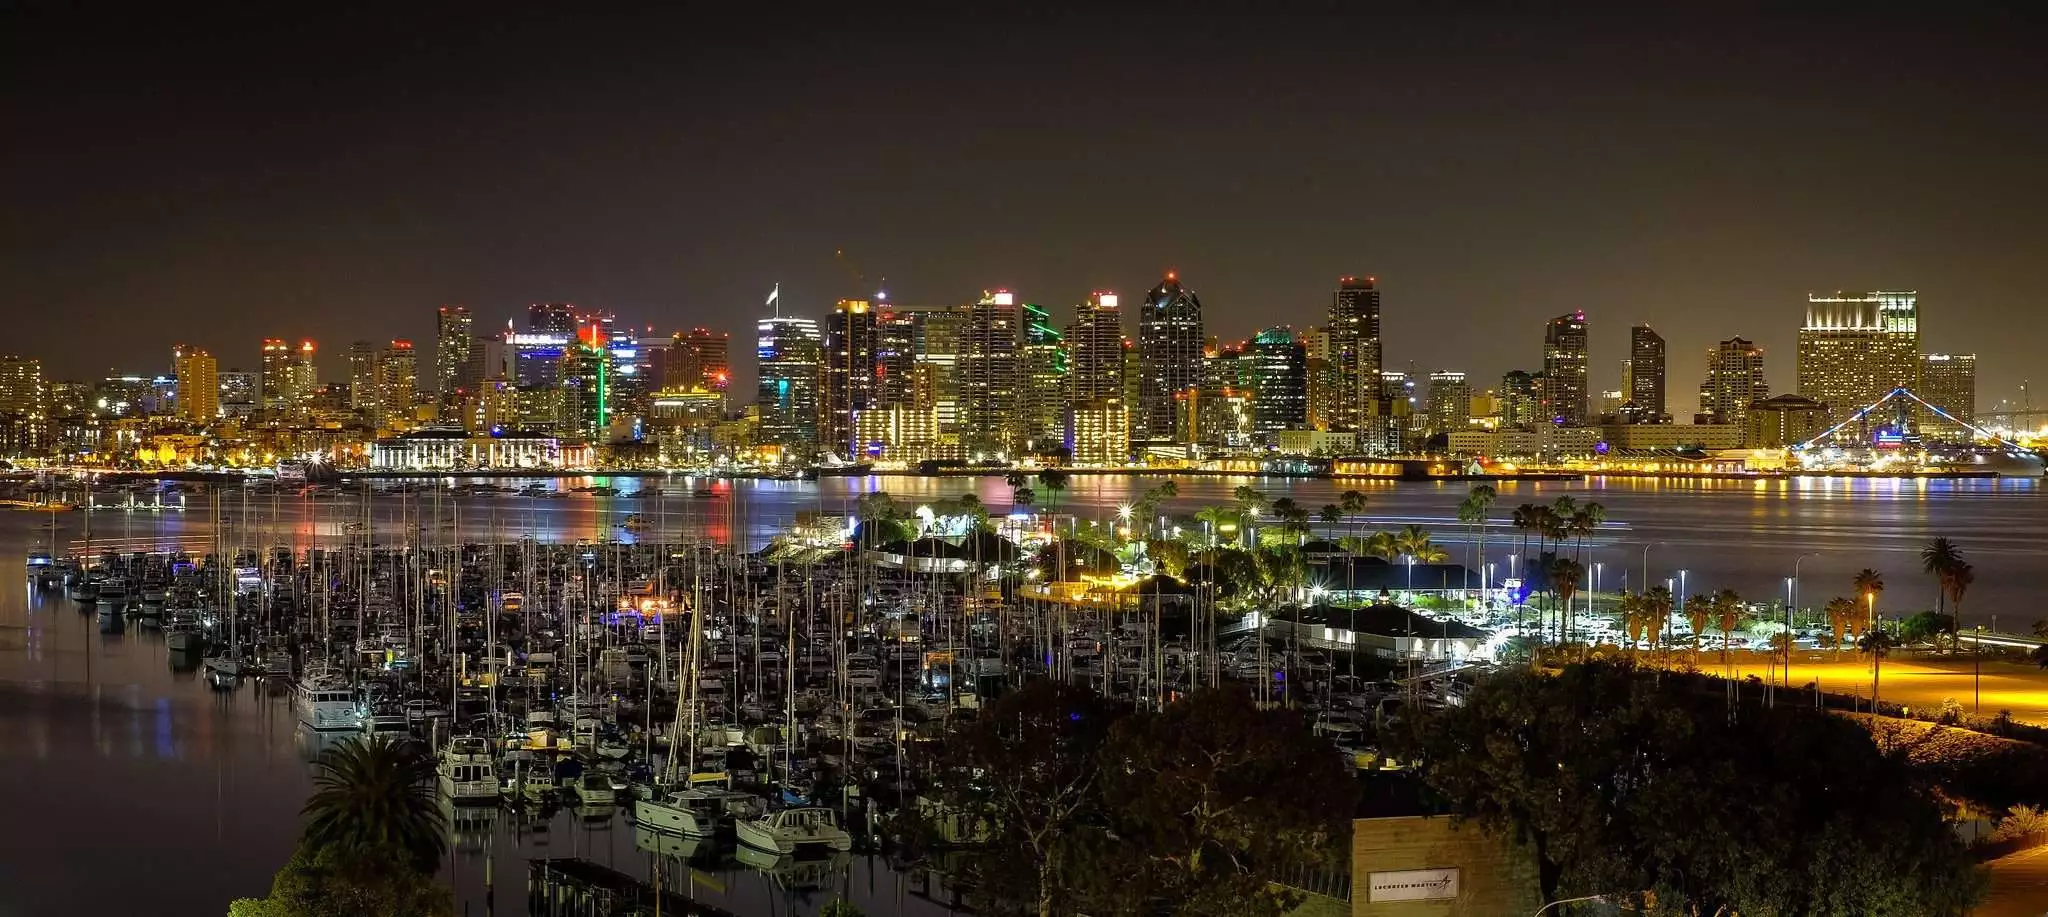 Things to do in San Diego